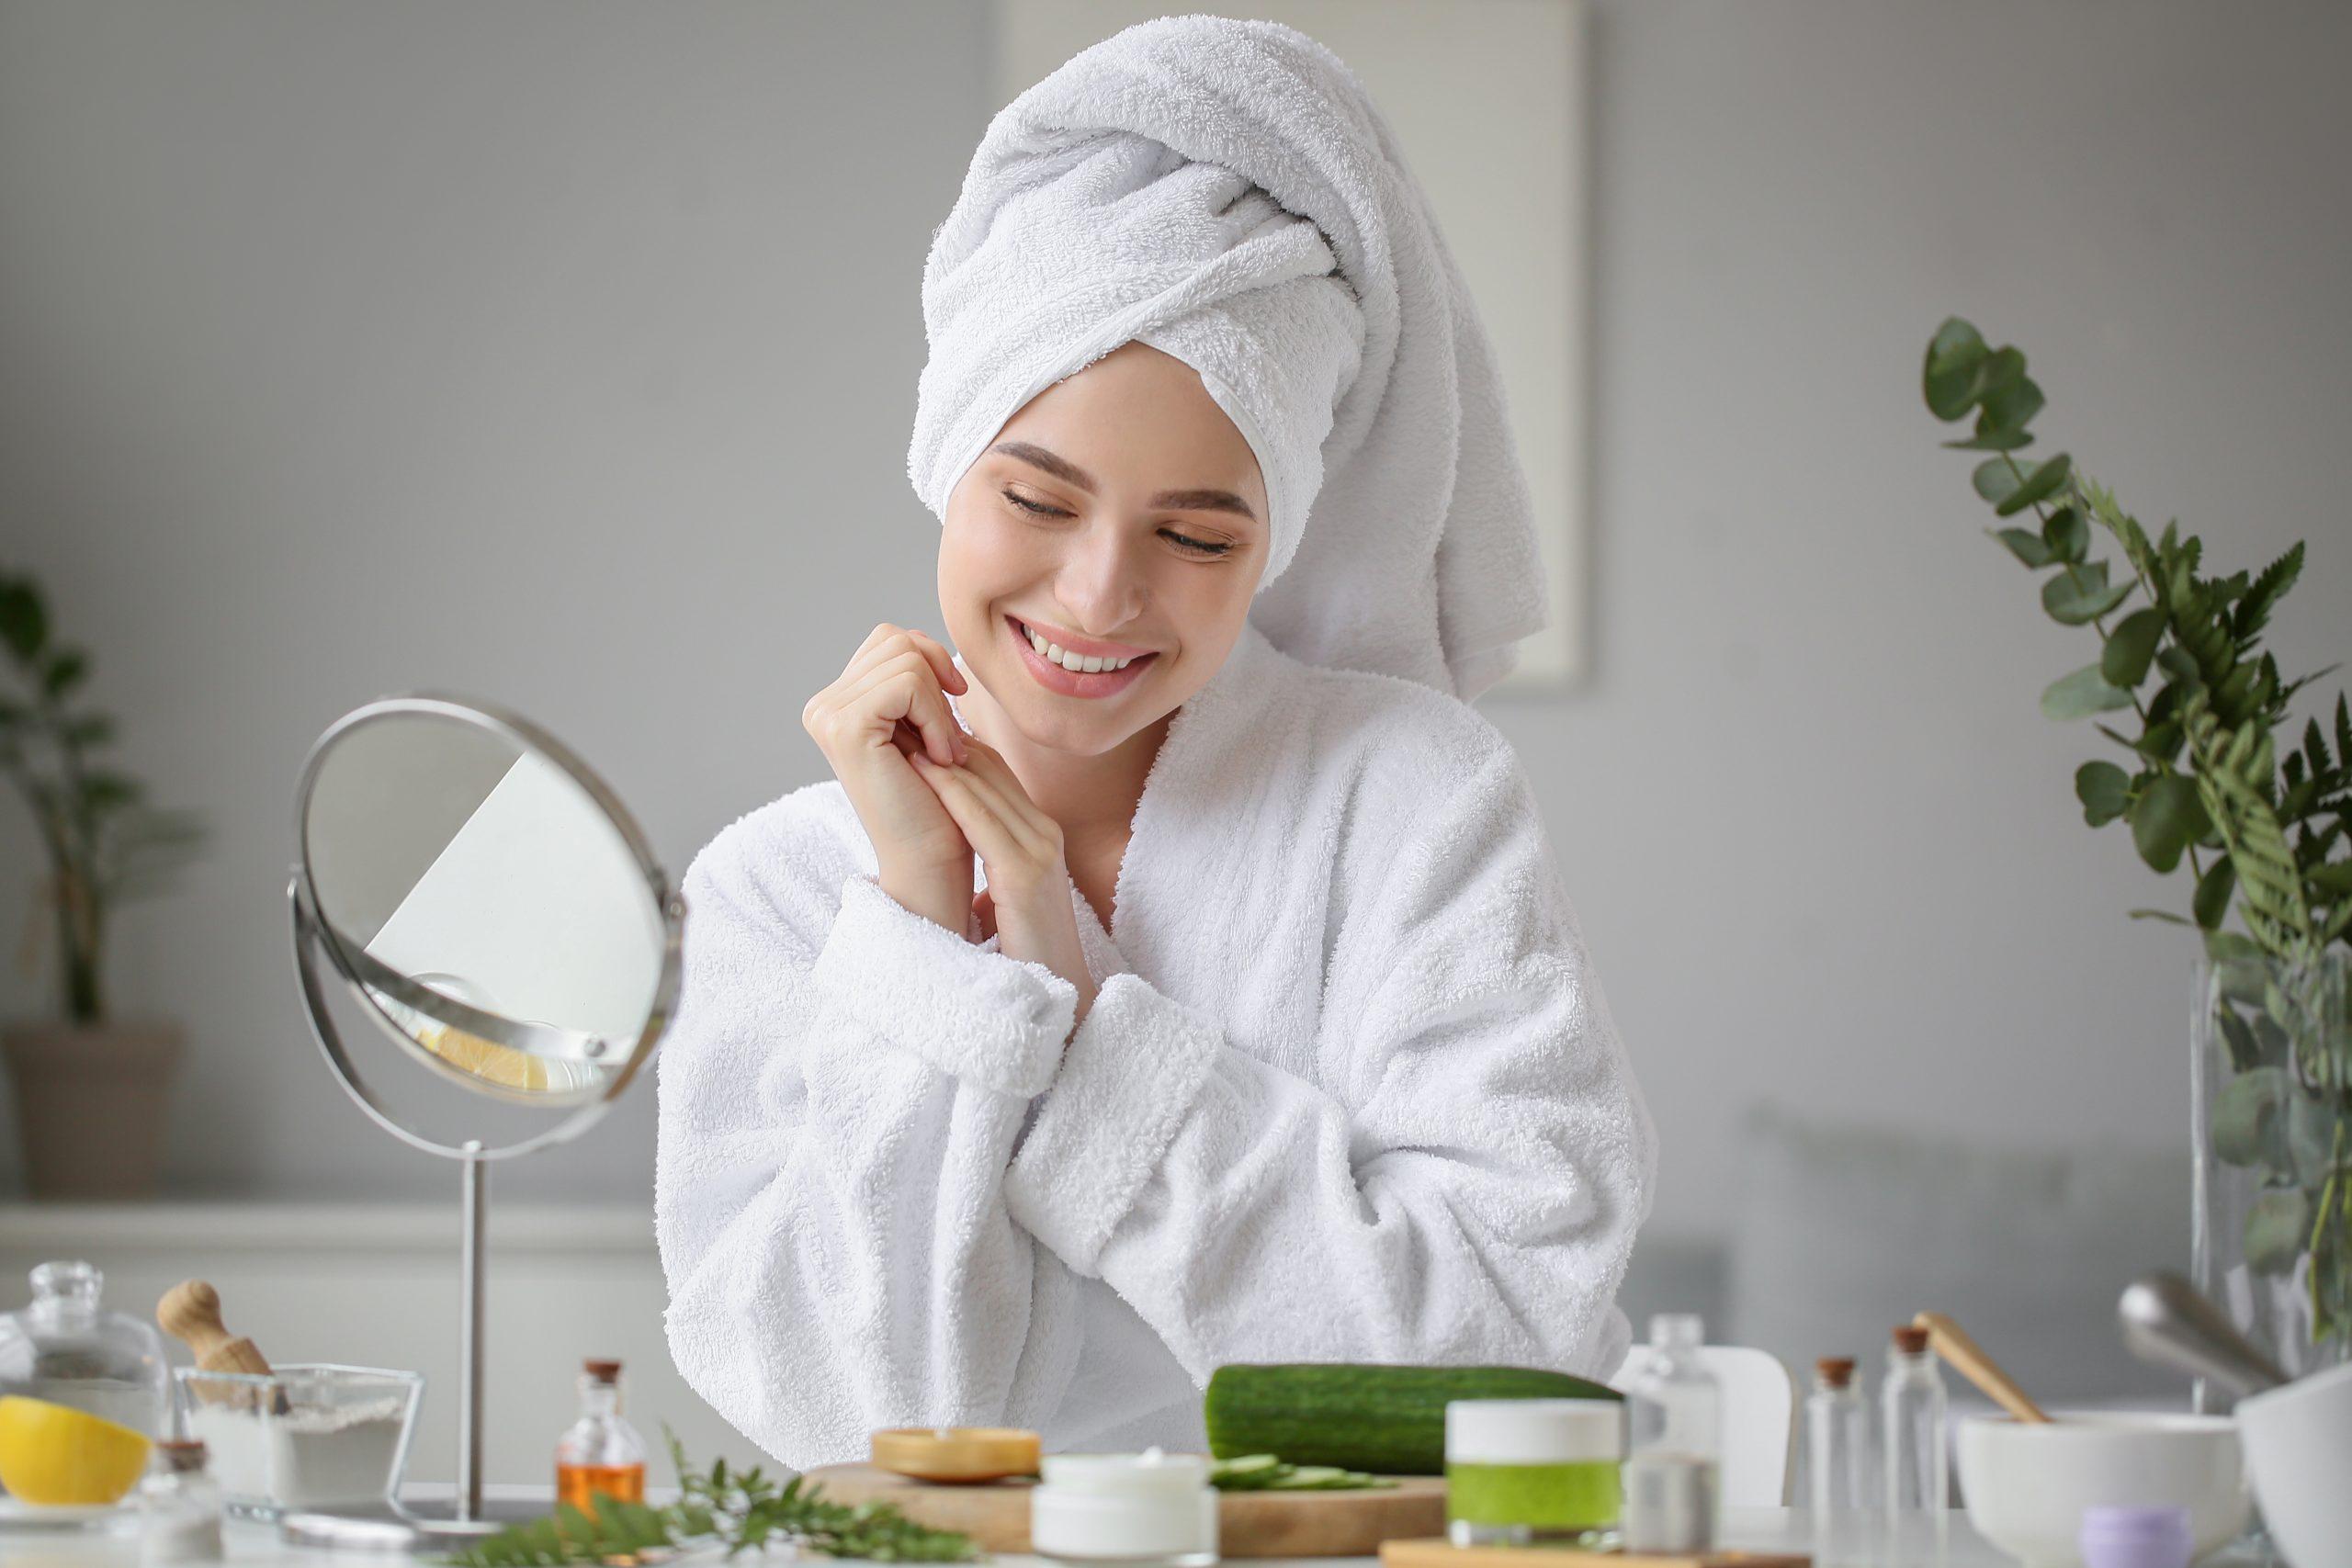 You Should Try These Top Skincare Products If You Have Oily Skin